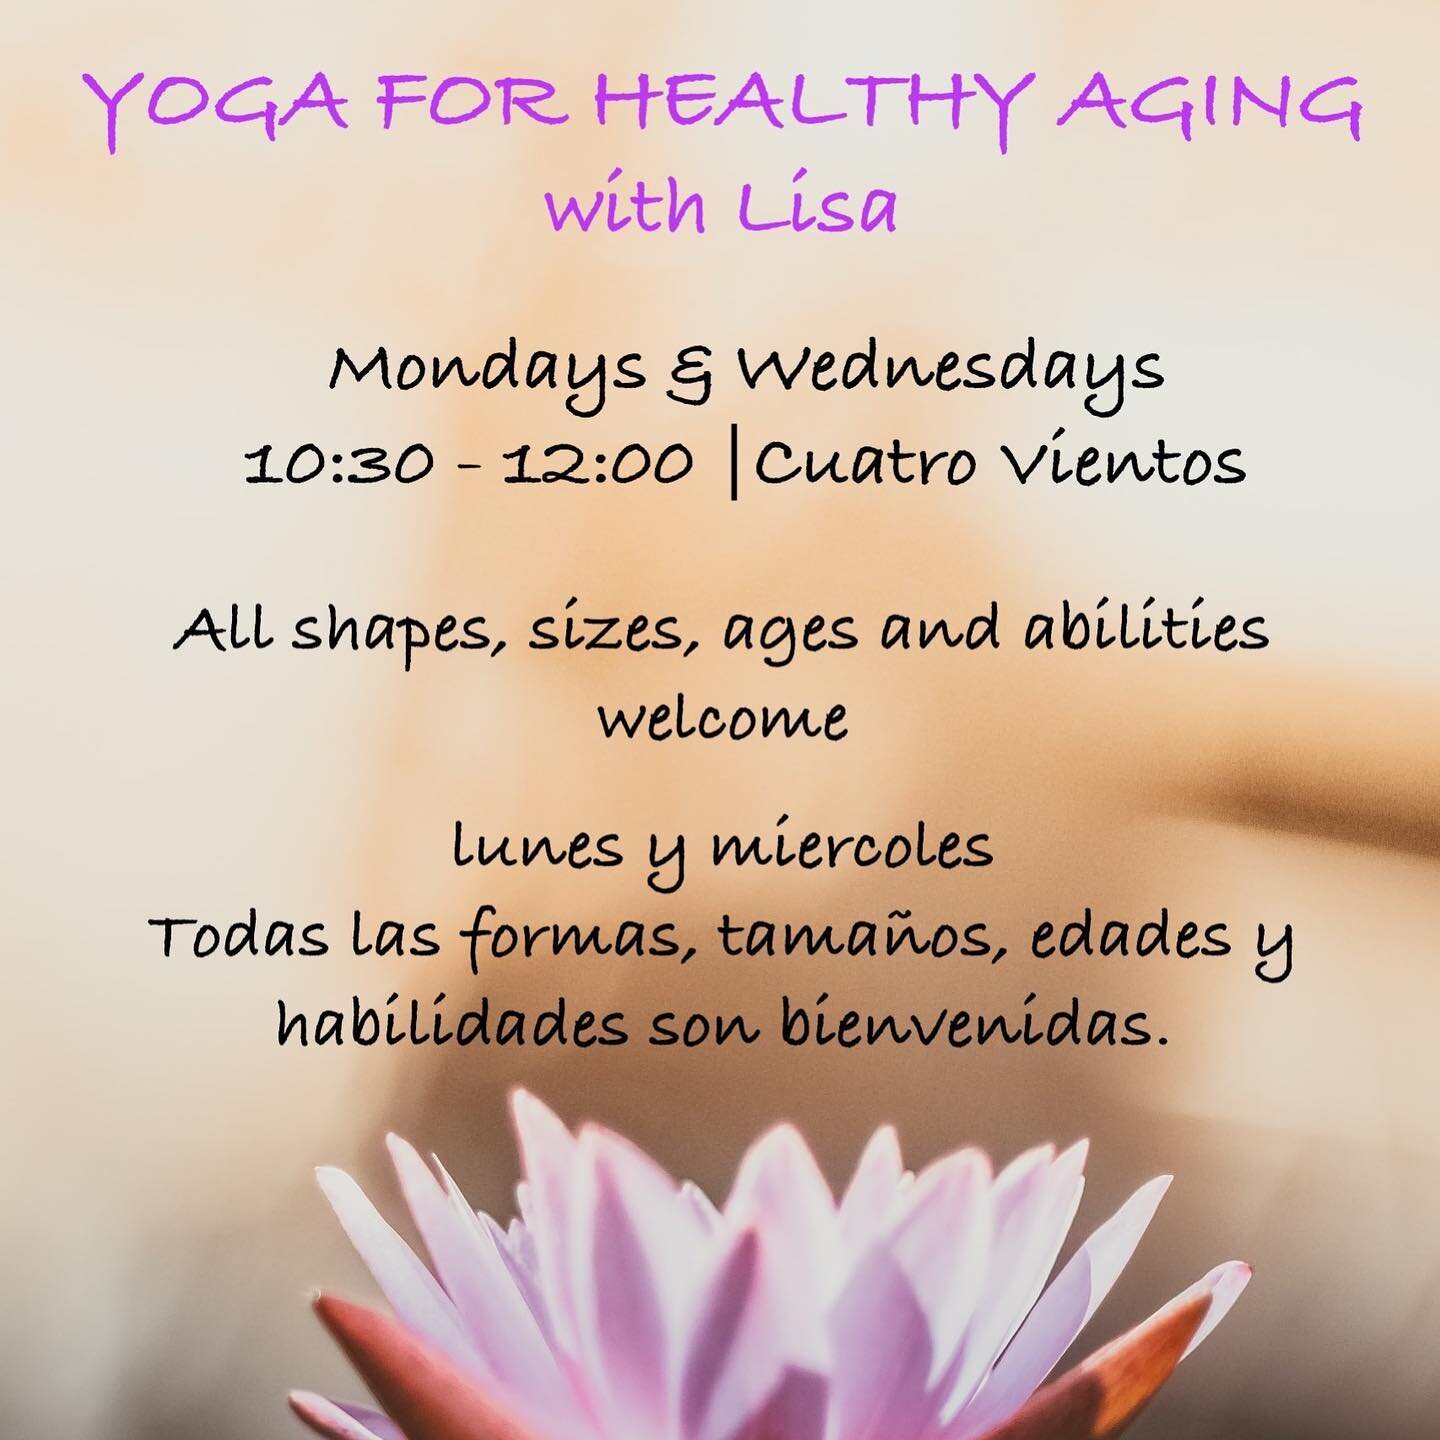 (Espa&ntilde;ol debajo) 

Yoga for Healthy Aging with Lisa

Mondays and Wednesdays 10:30a - 12:00p

Hatha Yoga for all shapes, sizes, ages + abilities 🙏

&hellip;&hellip;&hellip;&hellip;&hellip;&hellip;&hellip;&hellip;&hellip;&hellip;&hellip;&hellip